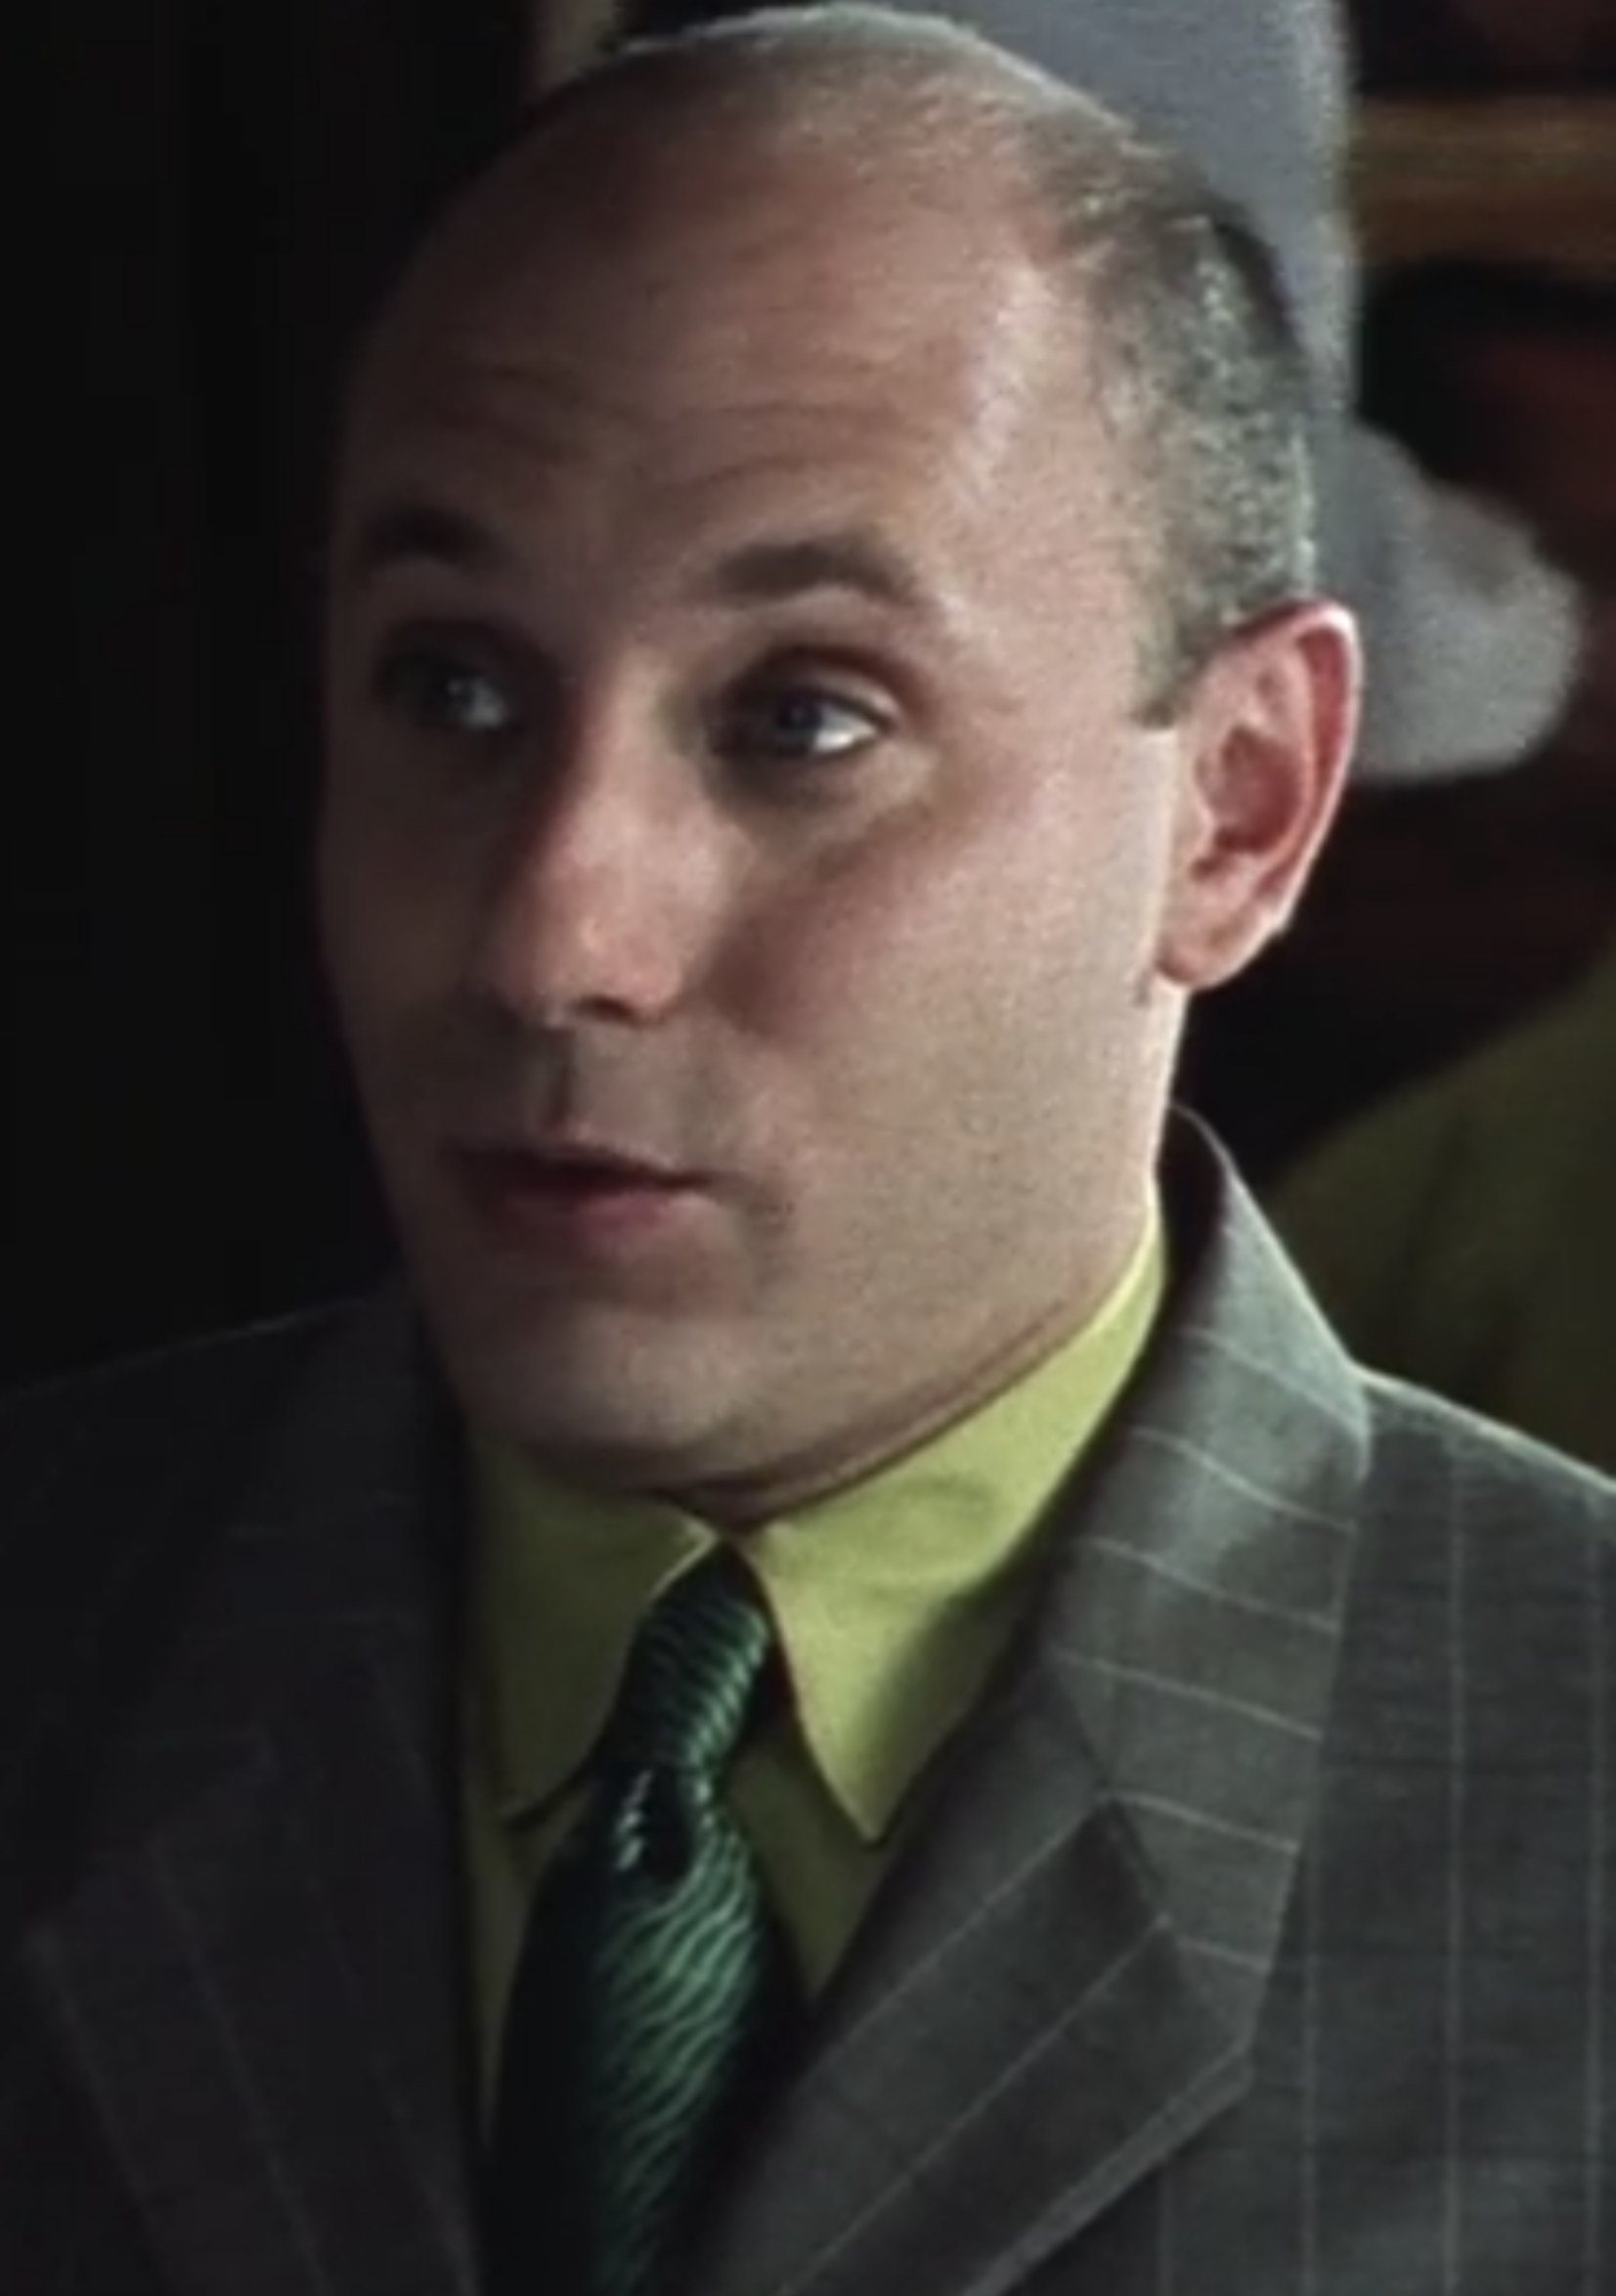 Garson wearing a suit and tie in the pilot episode